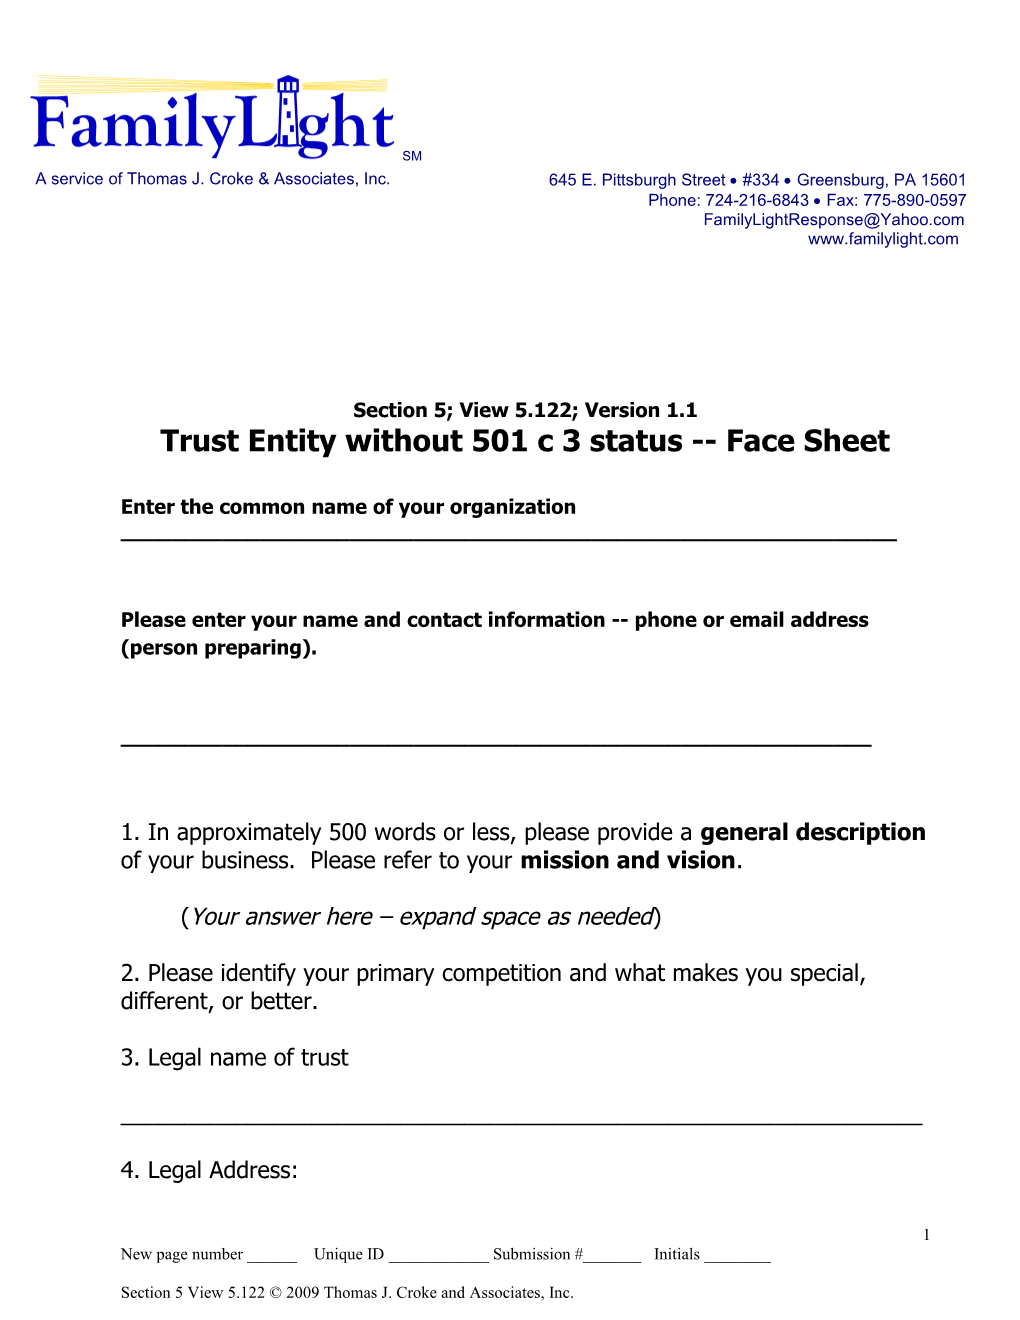 Trust Entity Without 501 C 3 Status Face Sheet